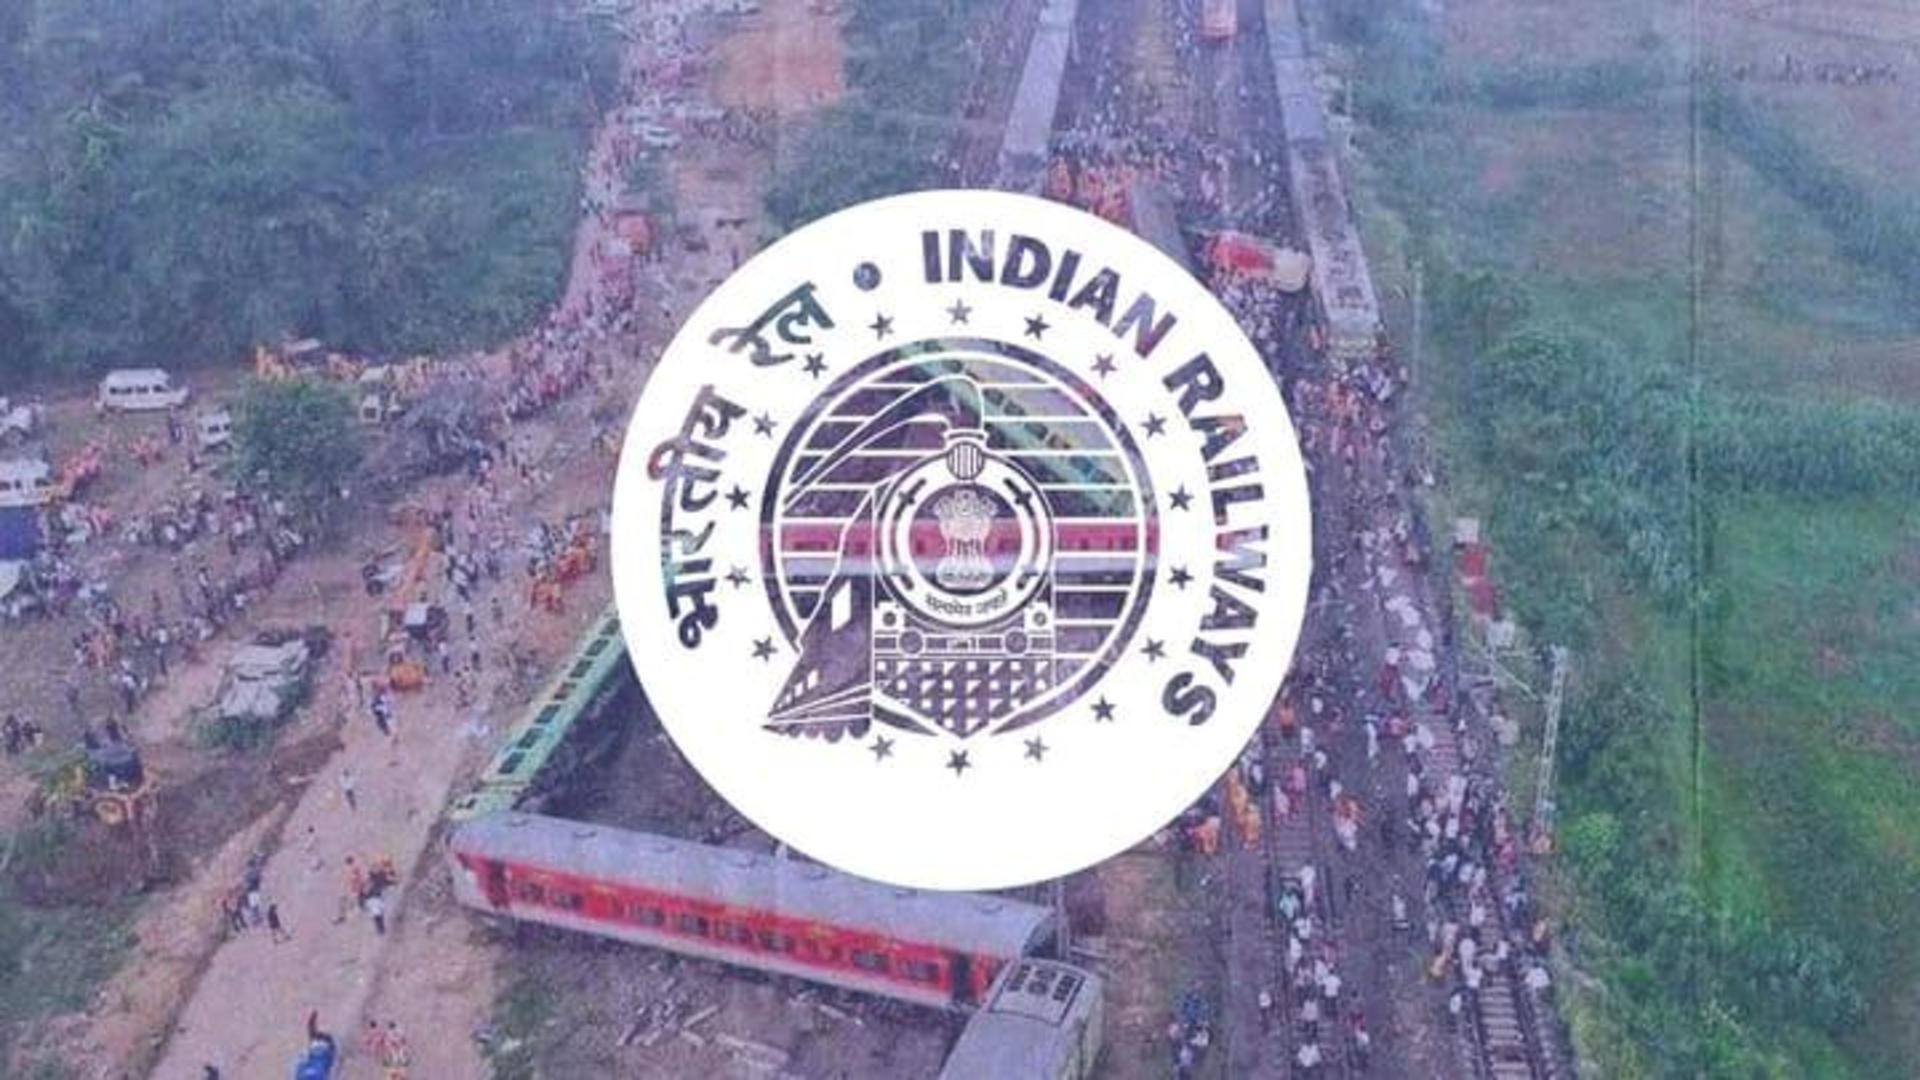 Odisha train accident could be result of human error: Report